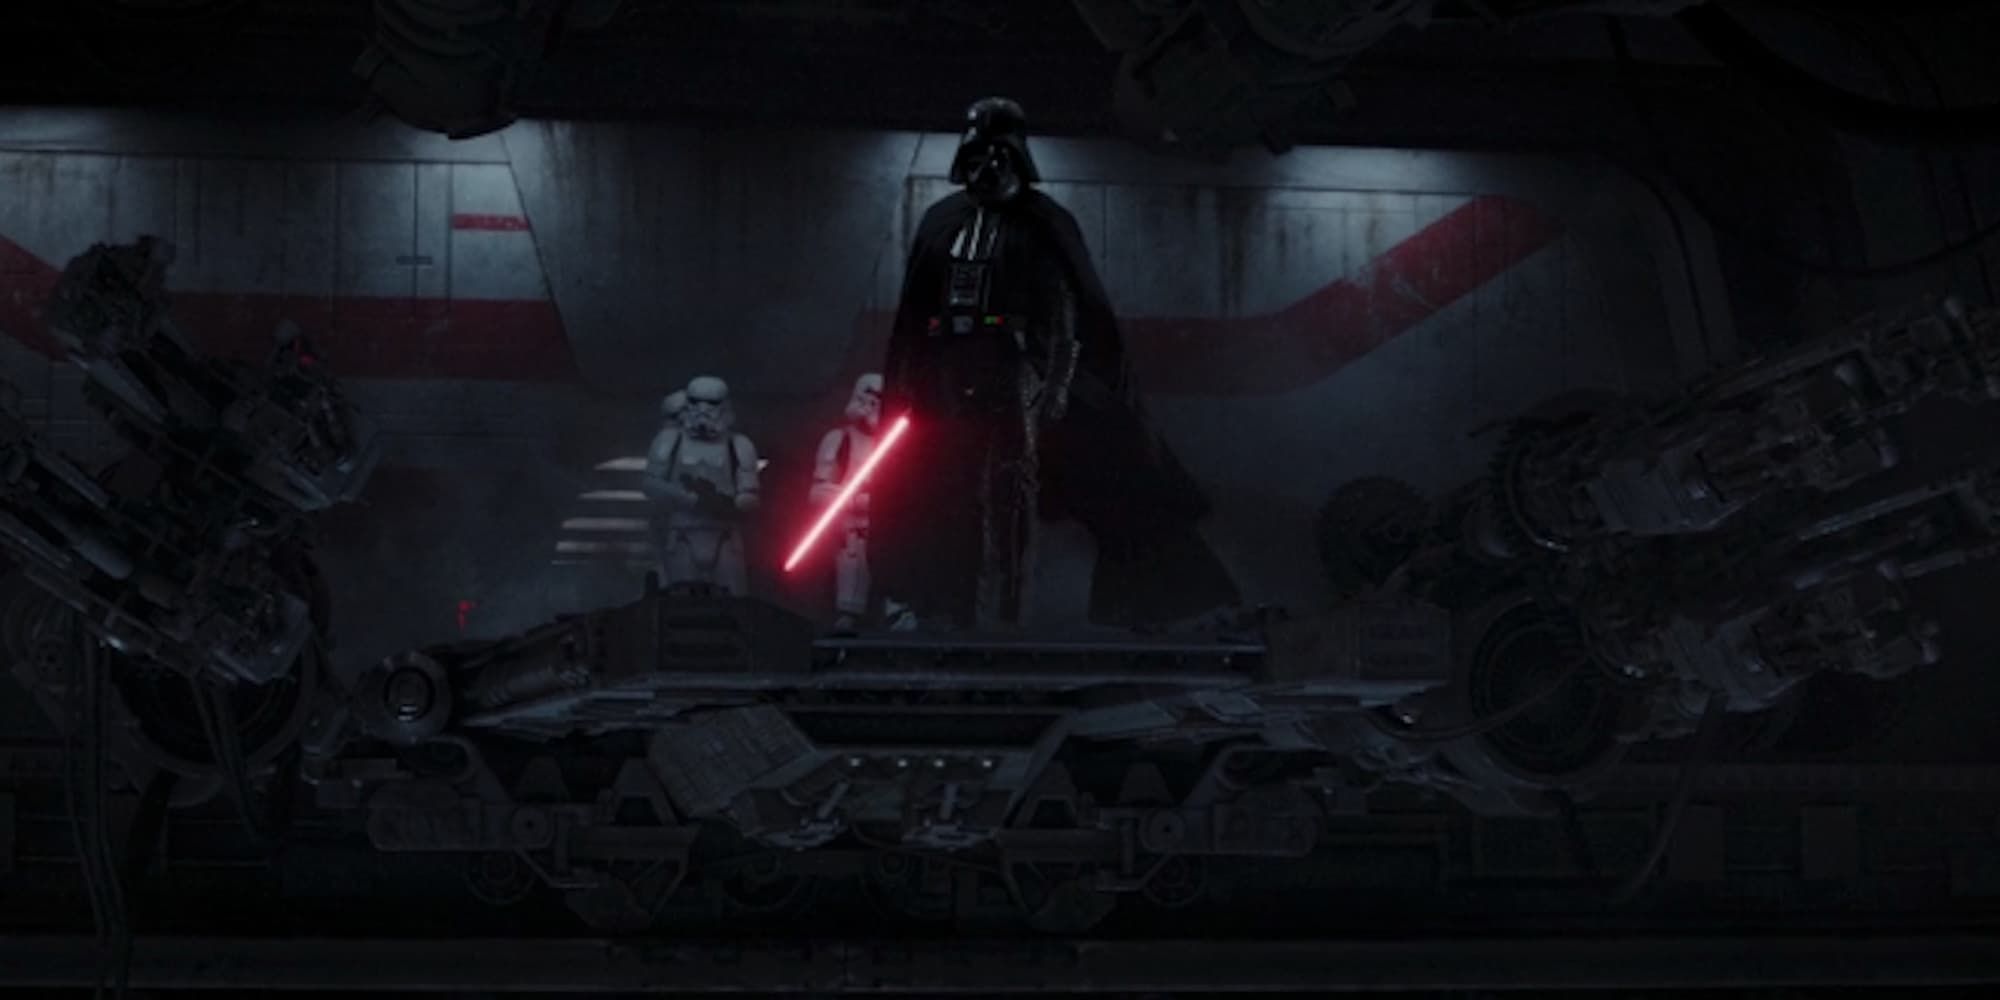 Flanked by Stomrtroopers, Darth Vader wields his Red Lightsaber and looks out from the wreckage of a ship he just attacked.